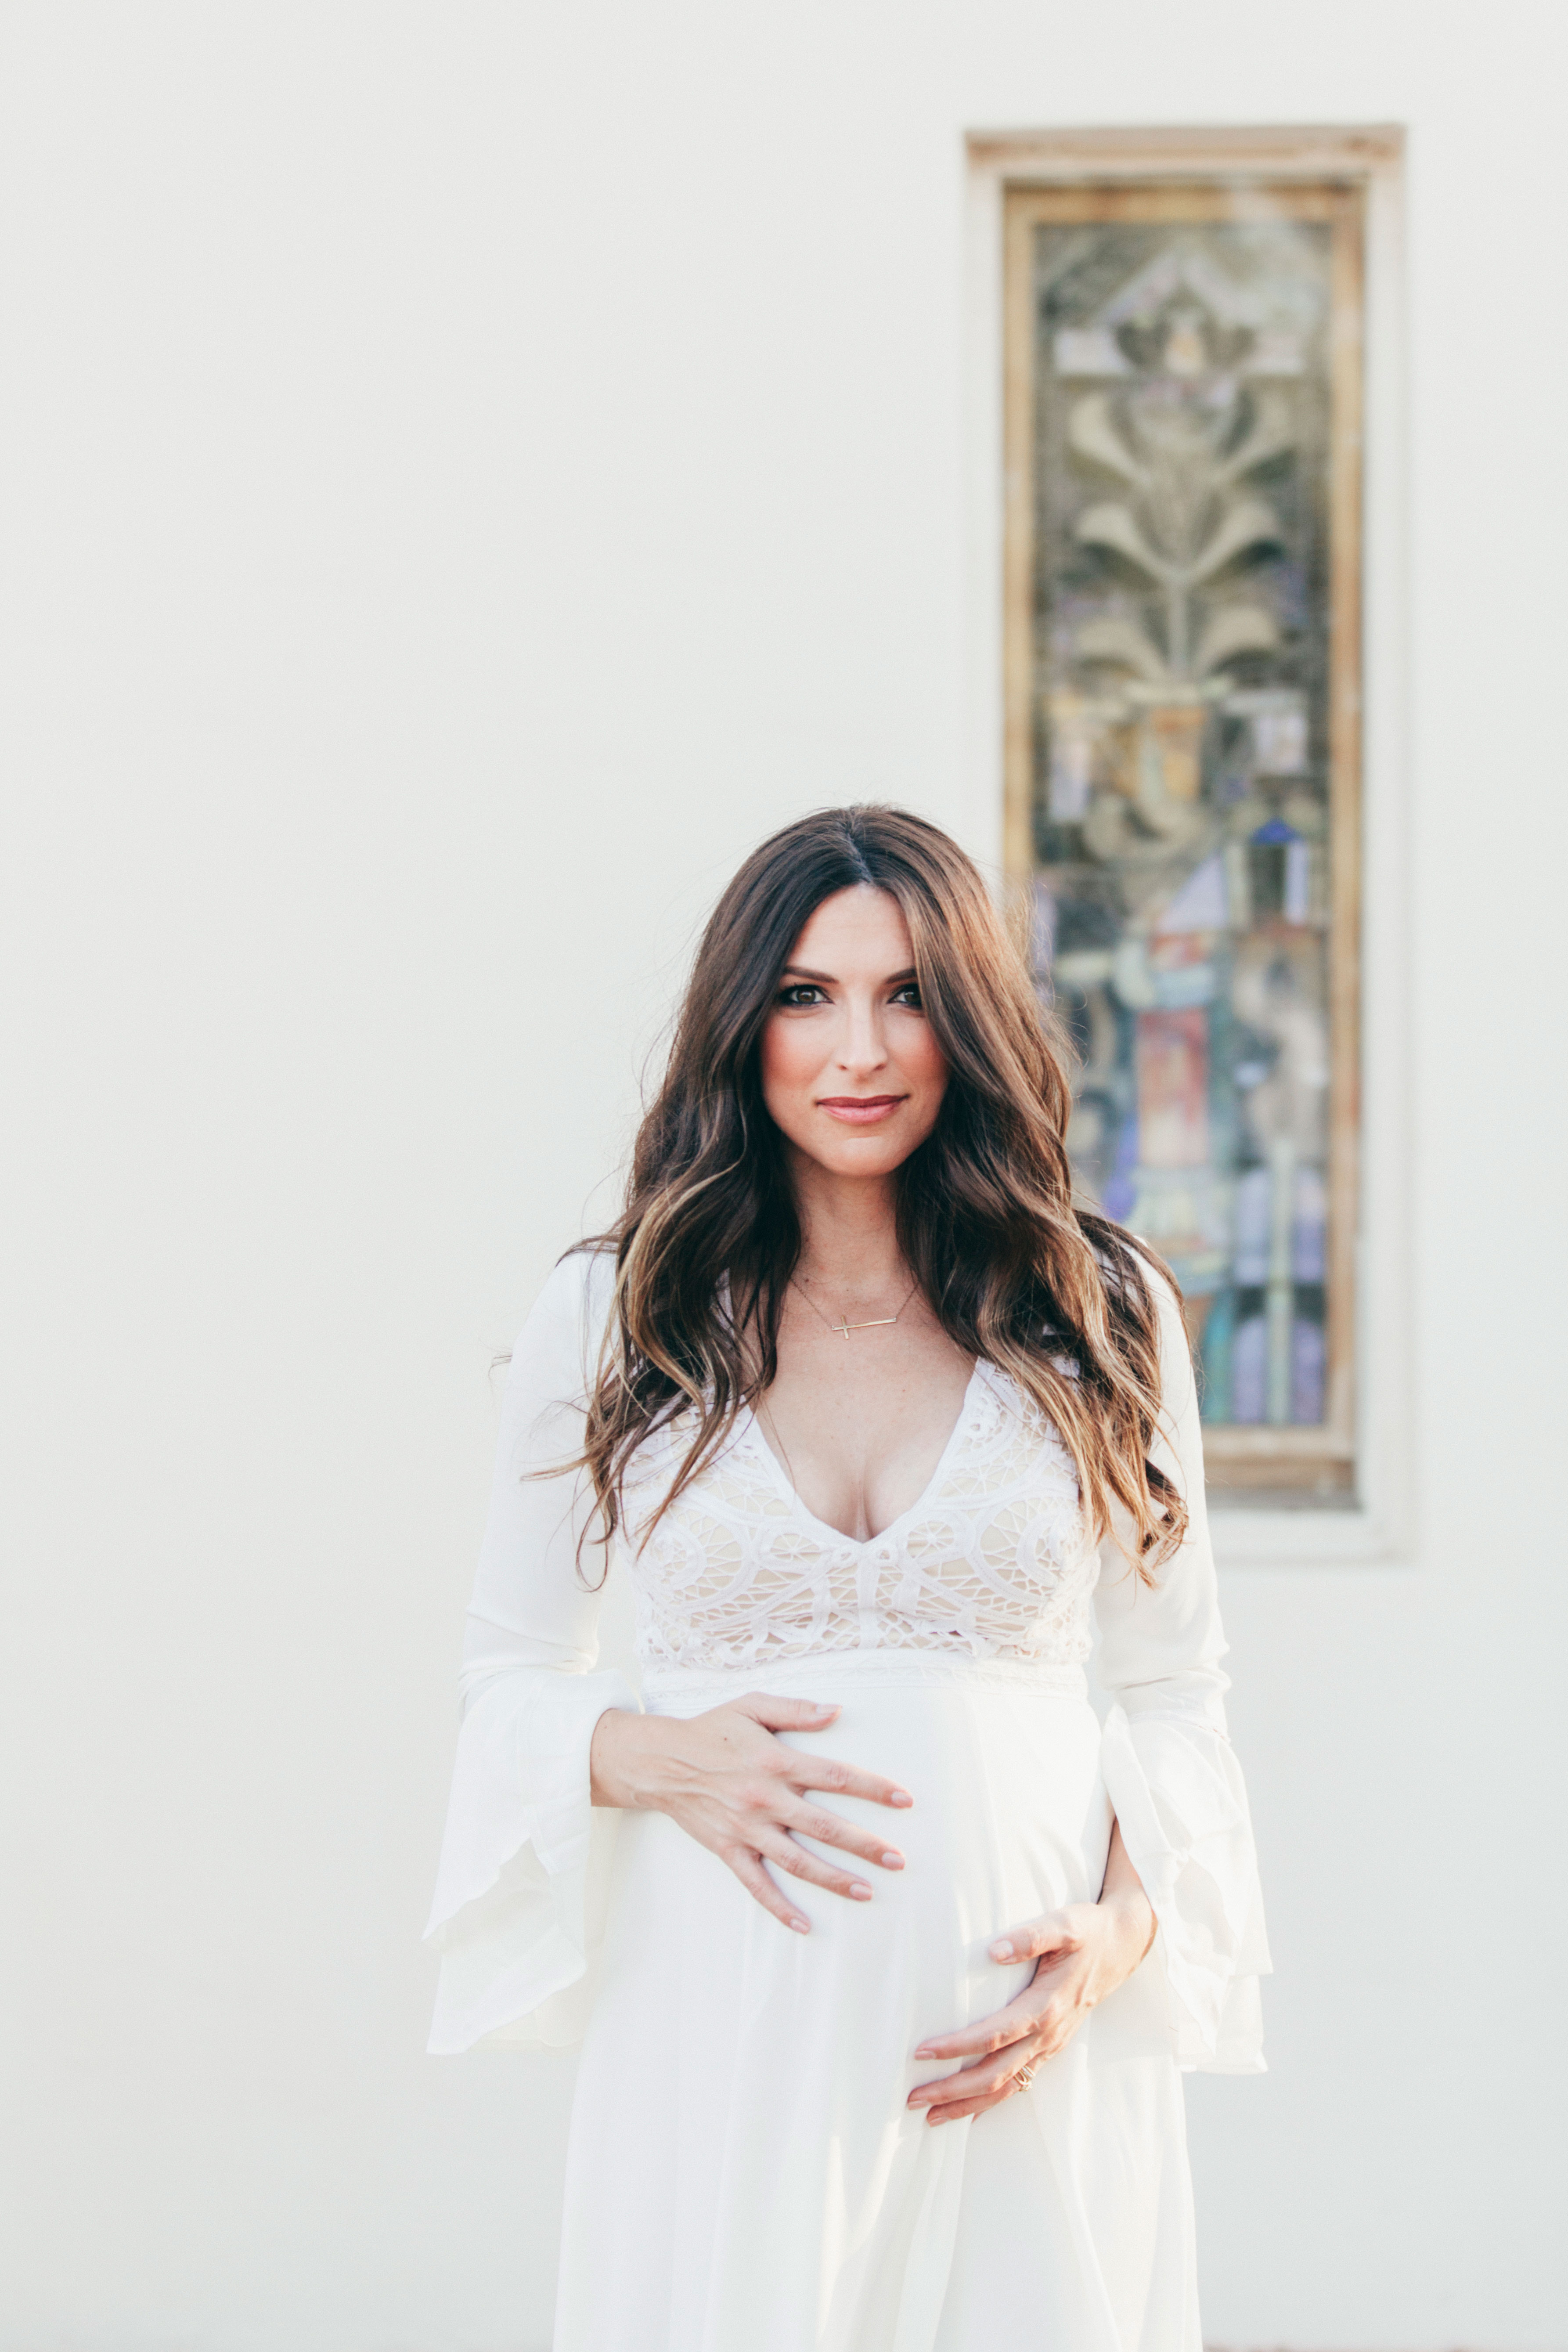 Beautiful Bohemian Maternity Session at Old Town Mission Scottsdale with Kate Nelle Photography 